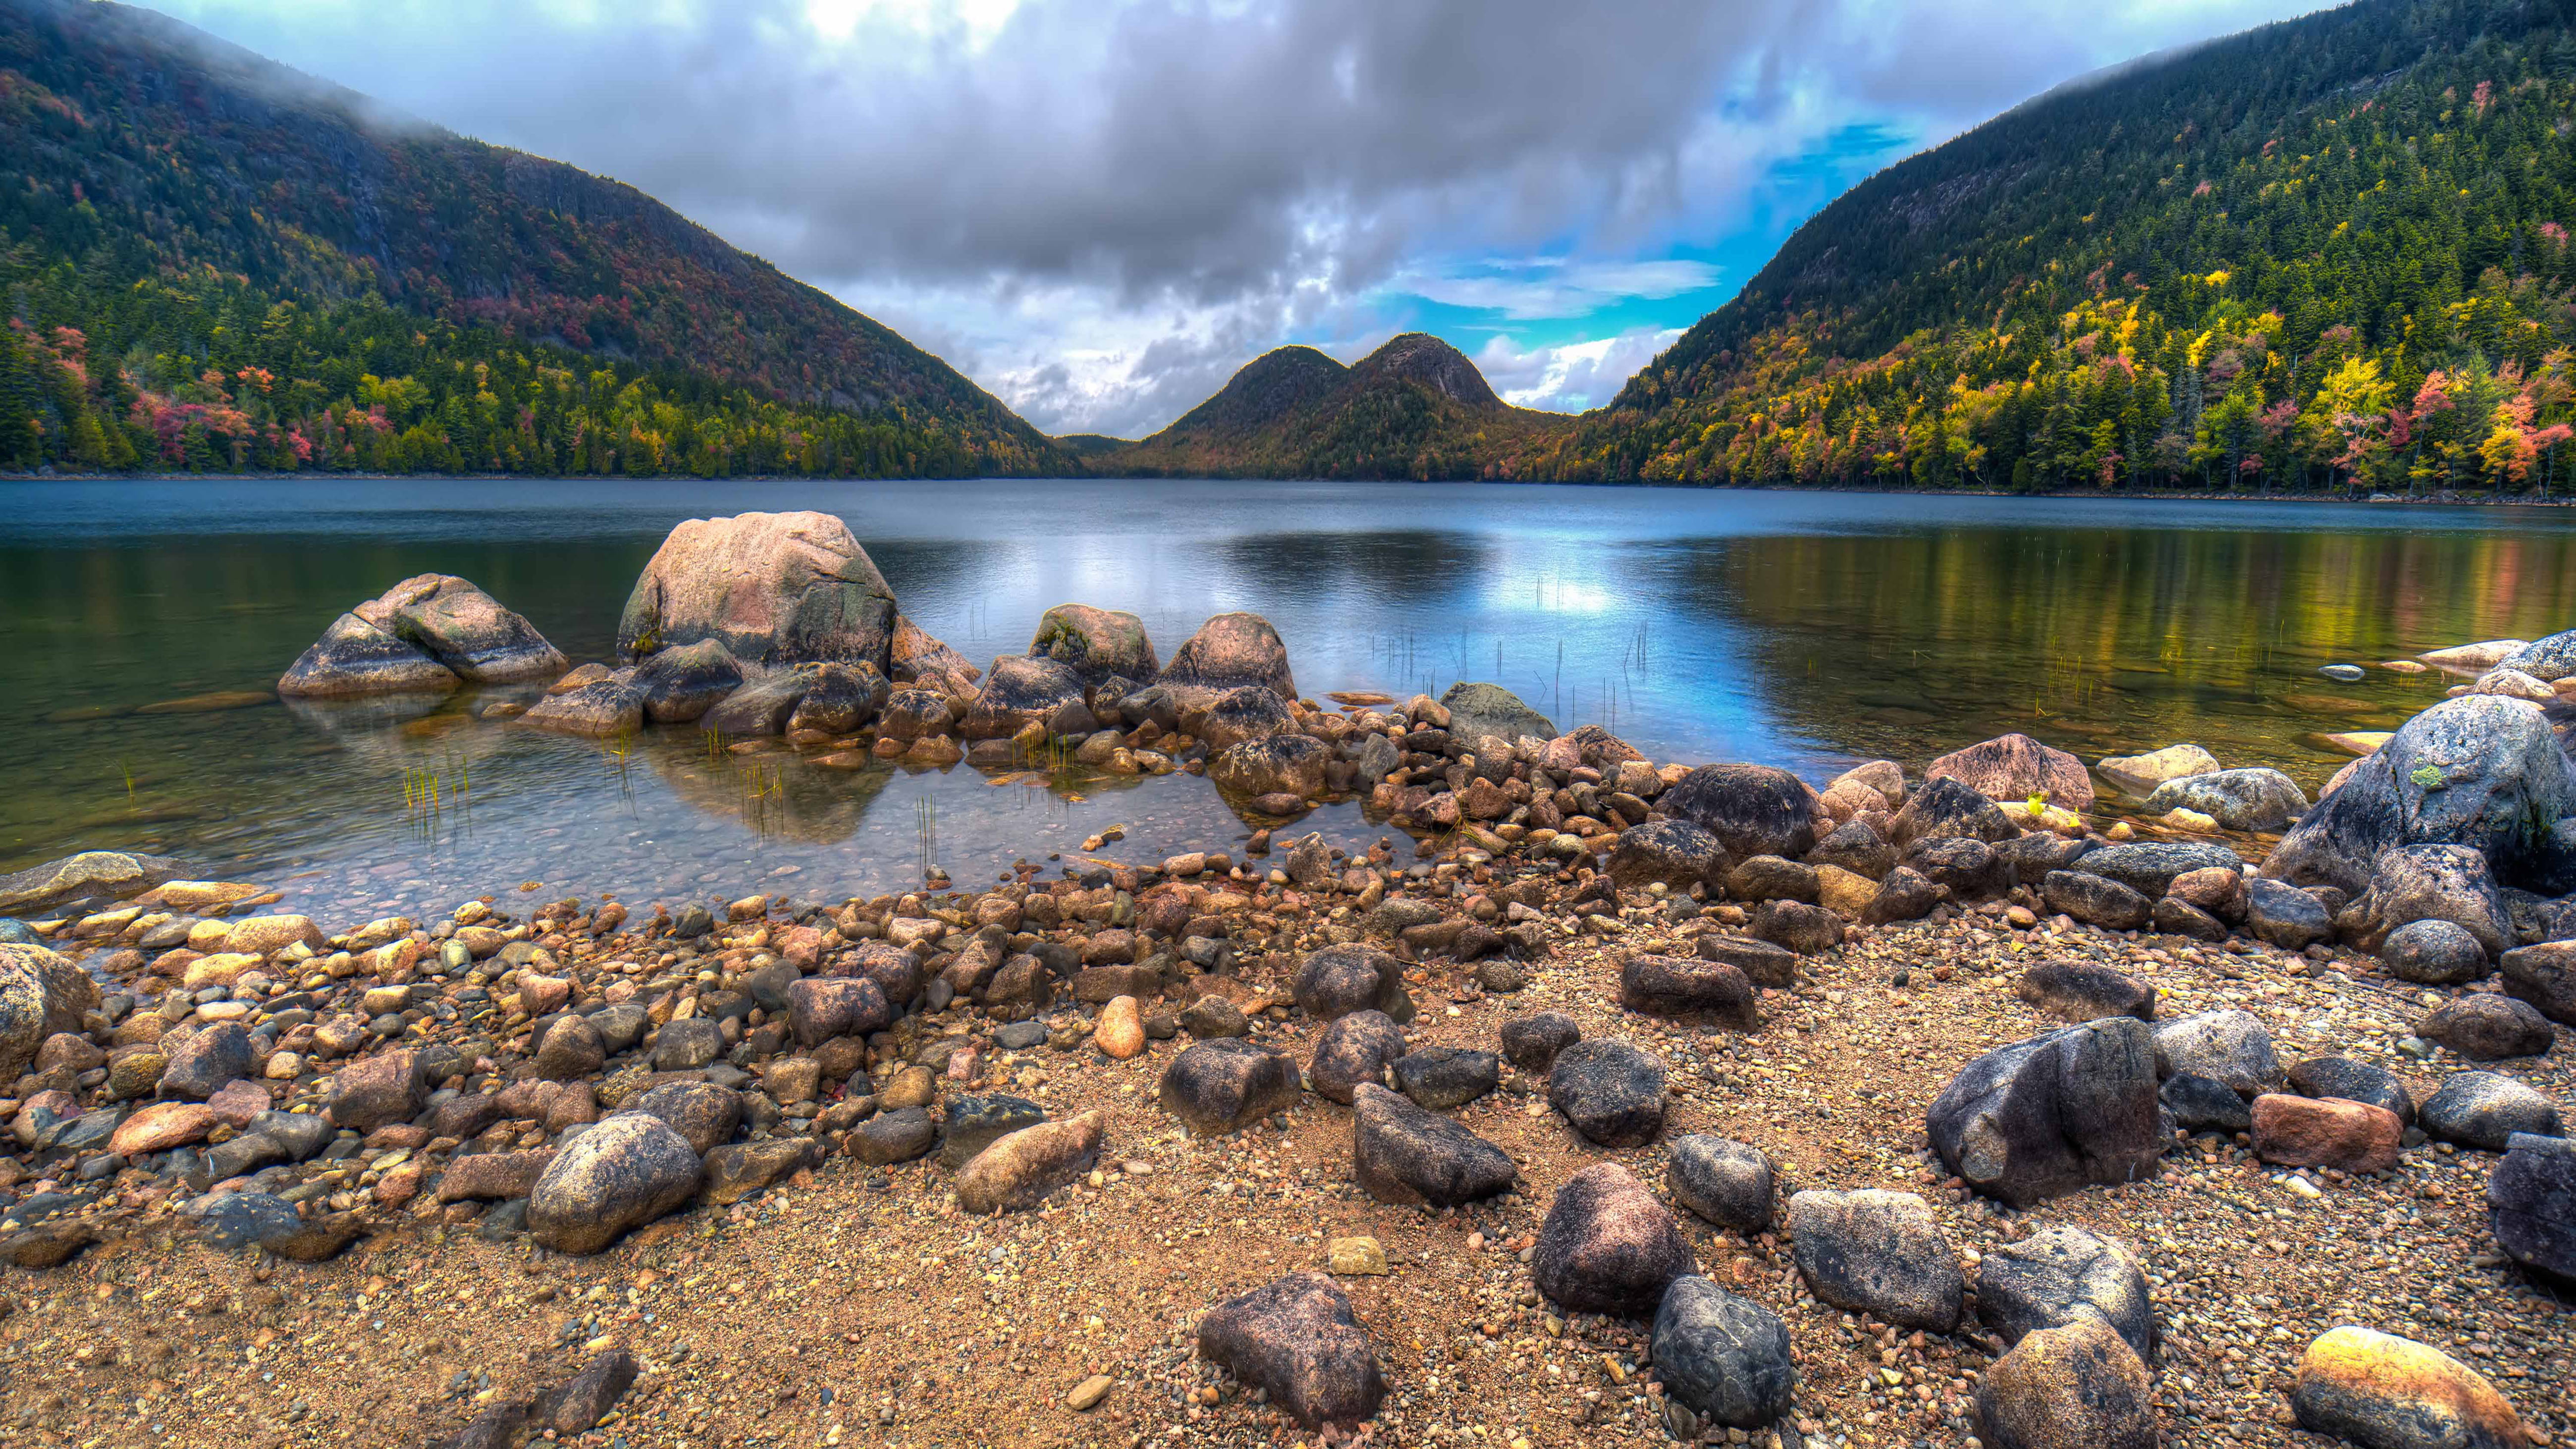 Jordan Pond And Acadia National Park Maine The Northeasternmost U.s. State HD Desktop Wallpapers 5200×2925